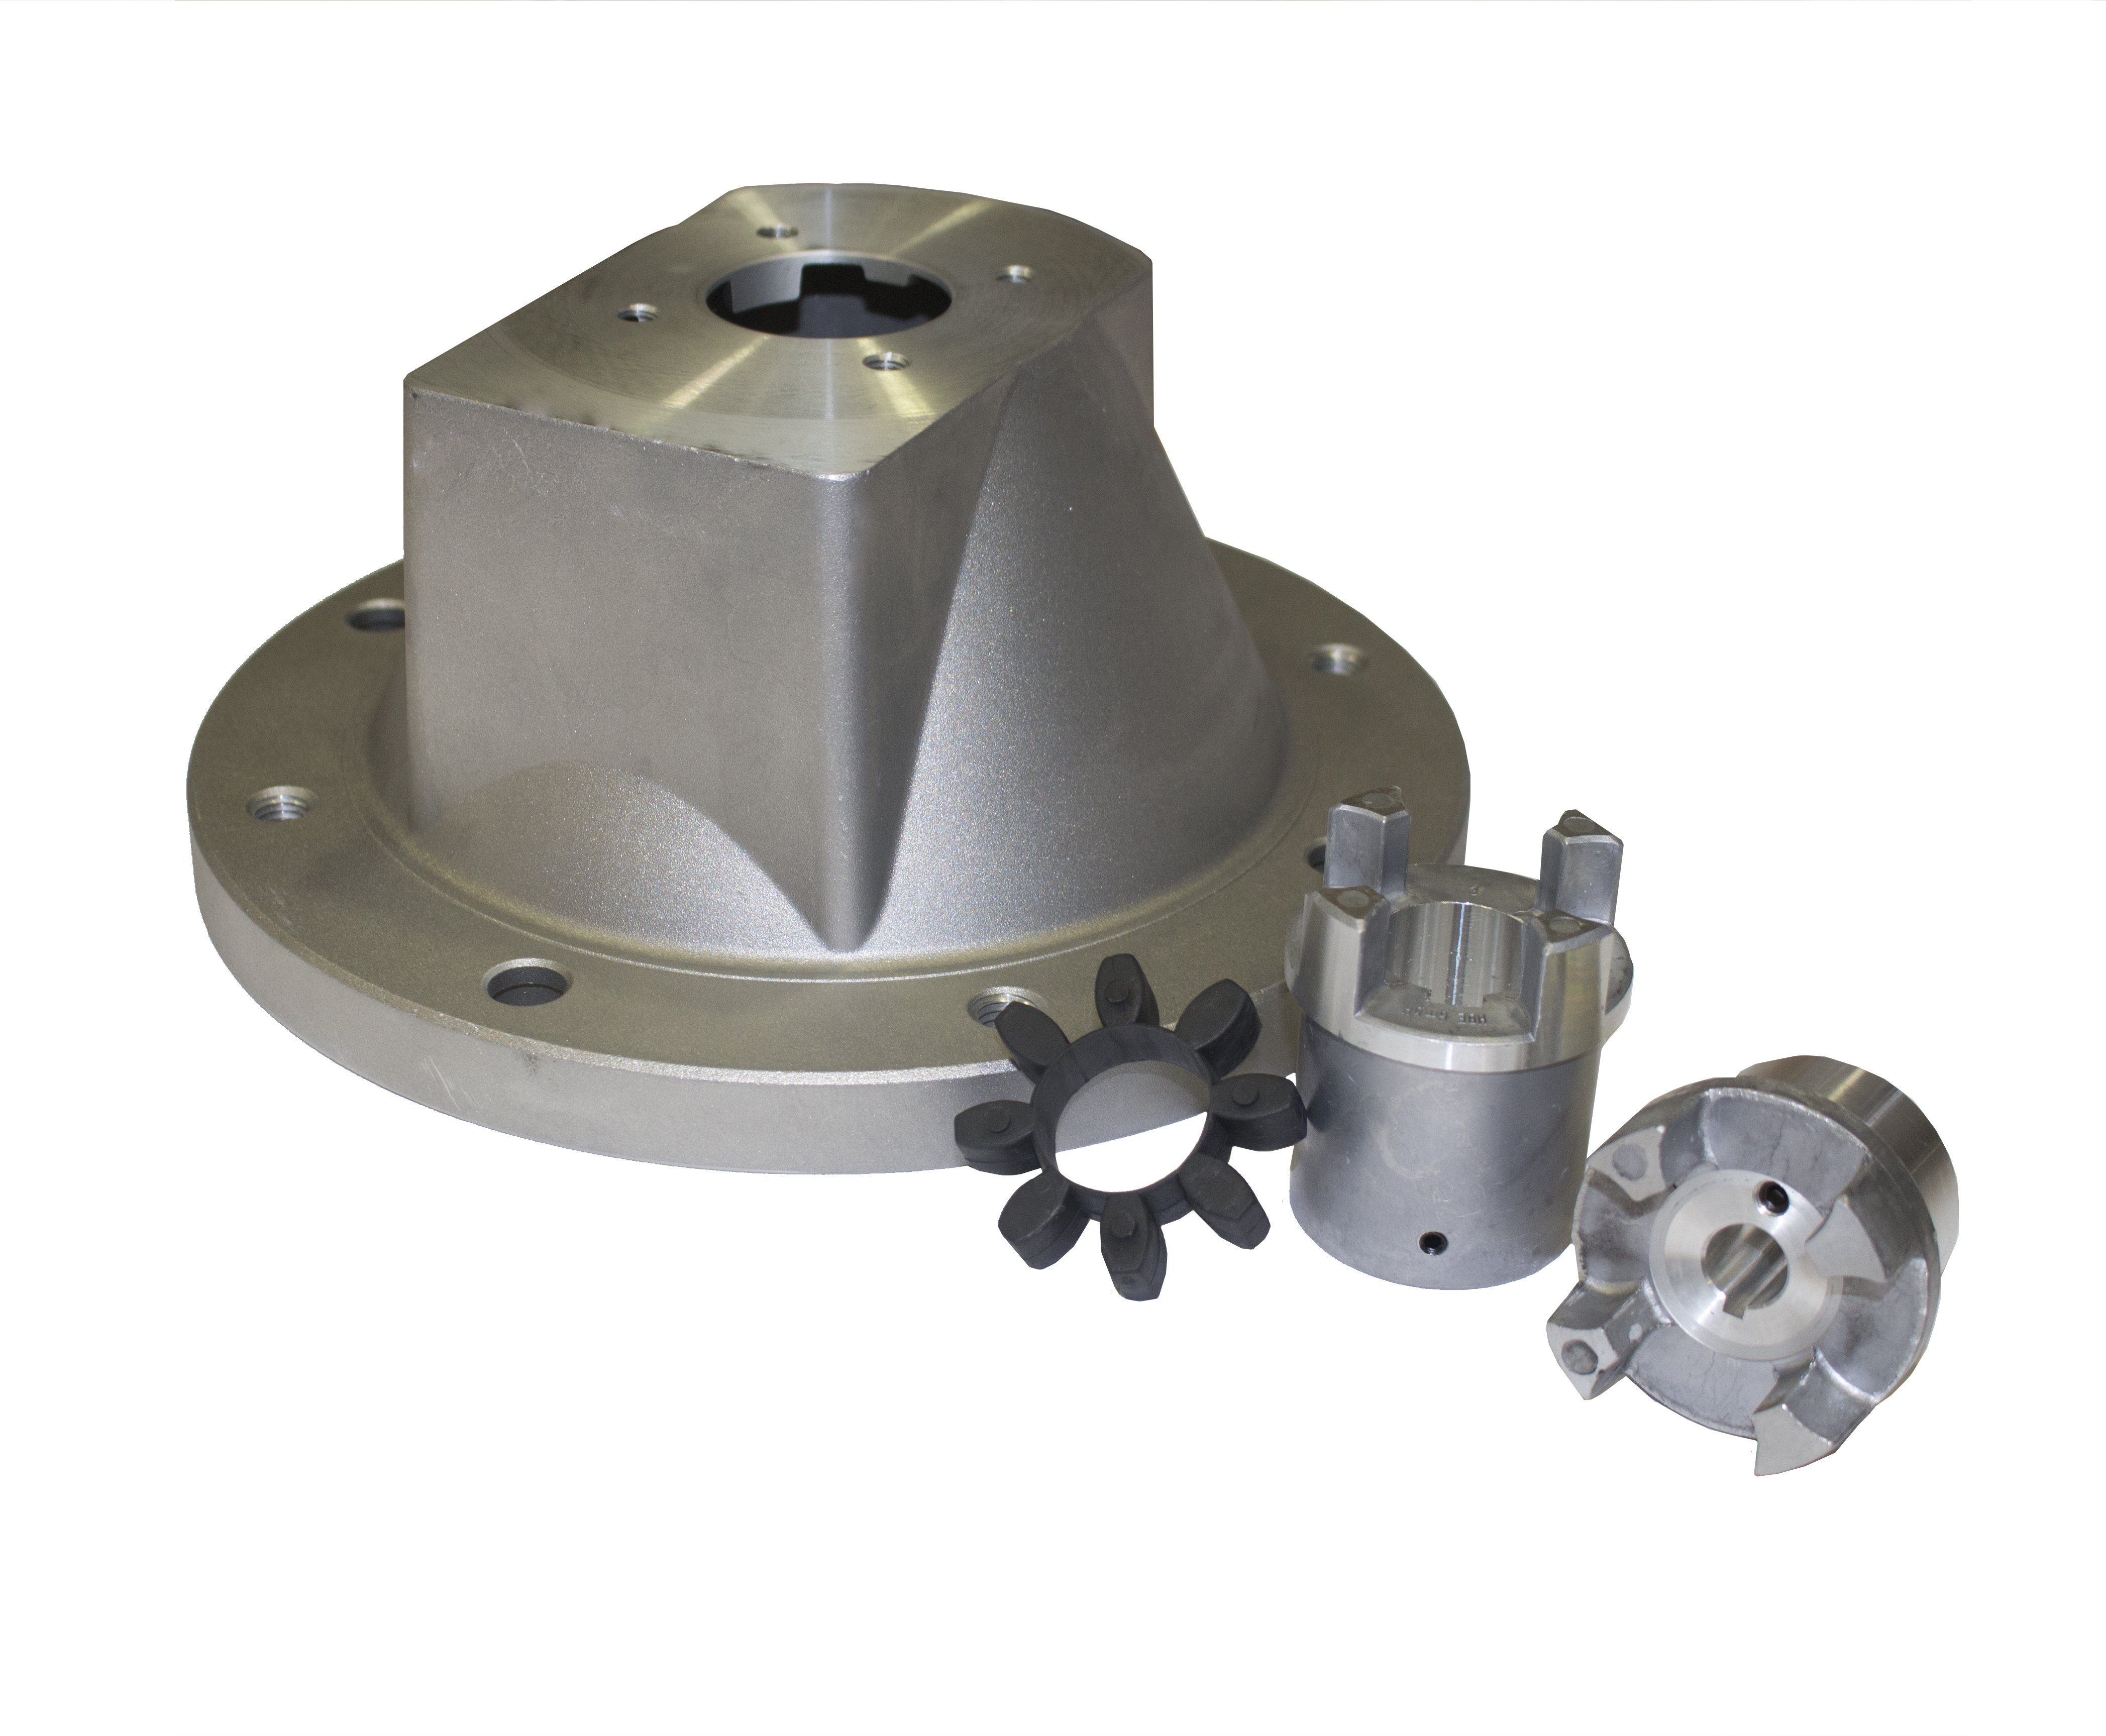 Hi-Low Pump Bell housing and drive coupling kit to suit 2.2KW motor 4 pole, 3-4KW motor either 2 or 4 pole to GPCBN